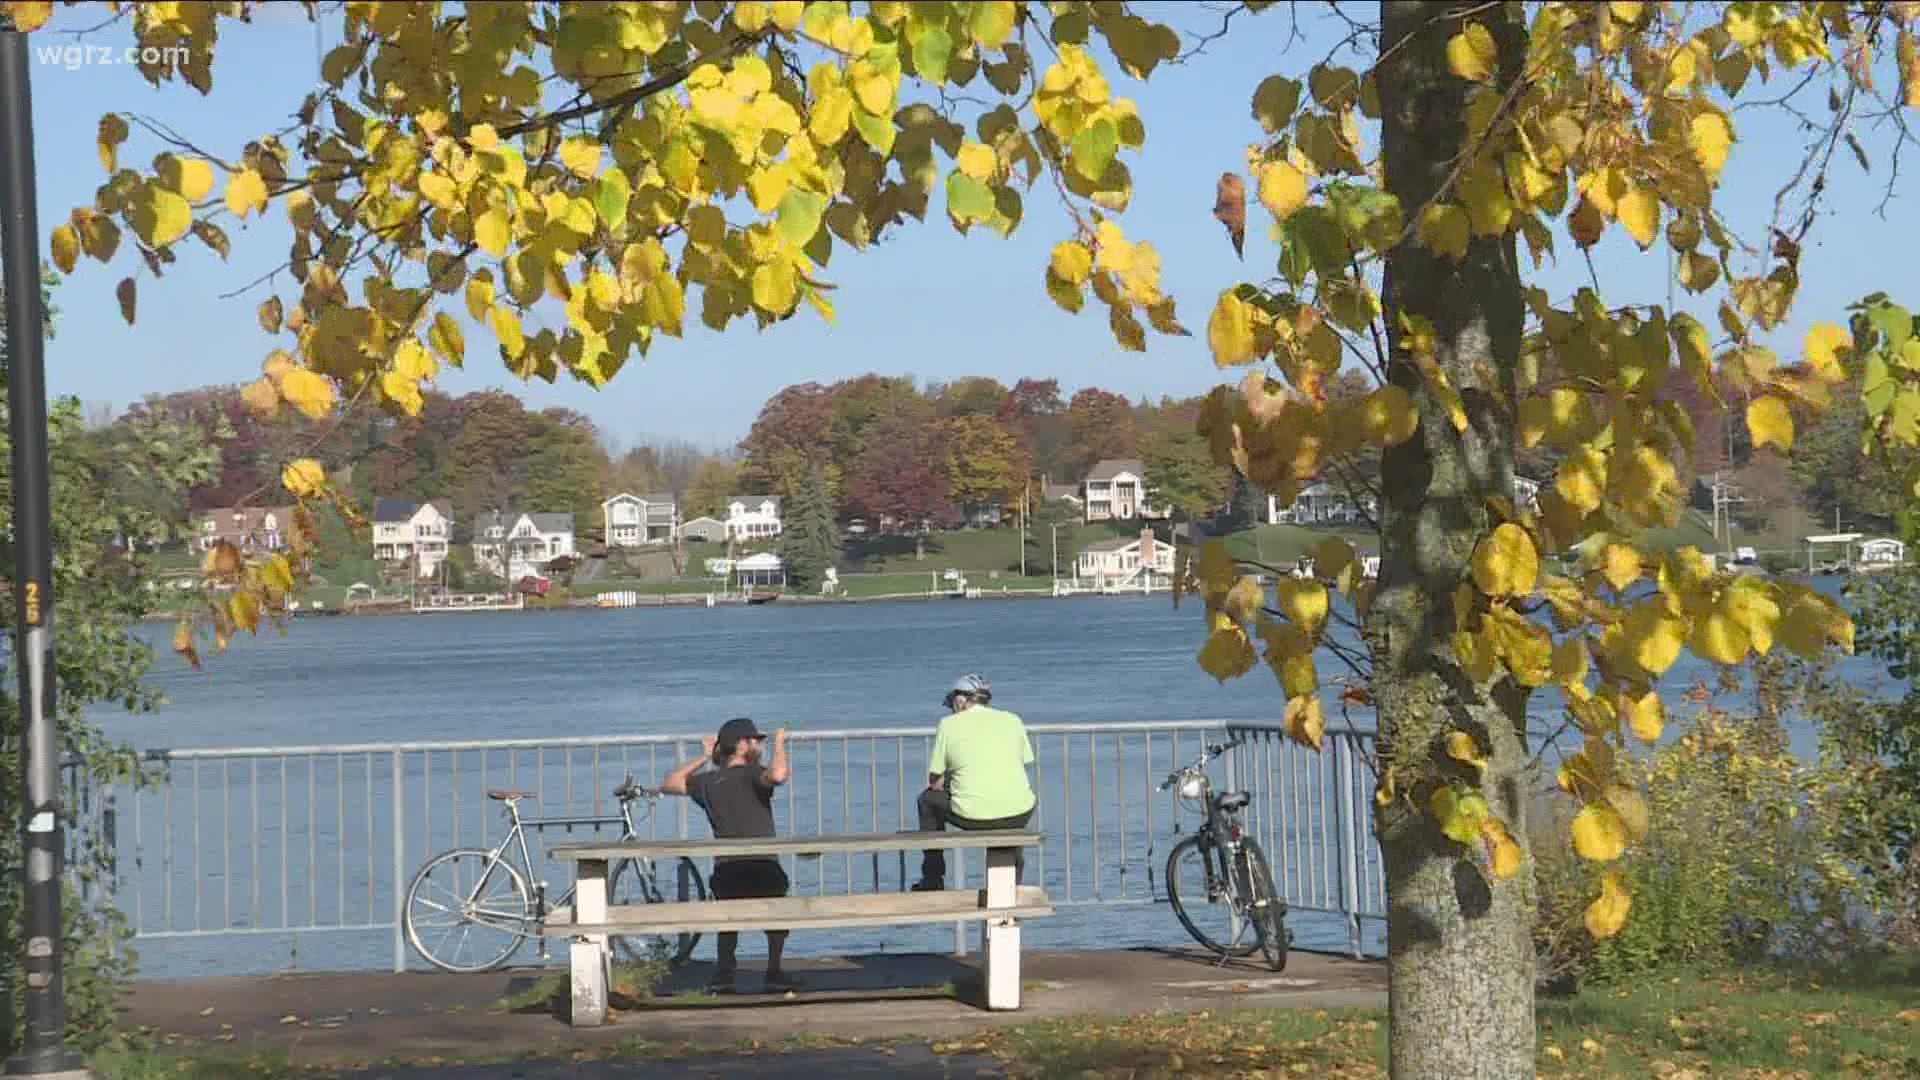 Upgrades coming to Isle View park